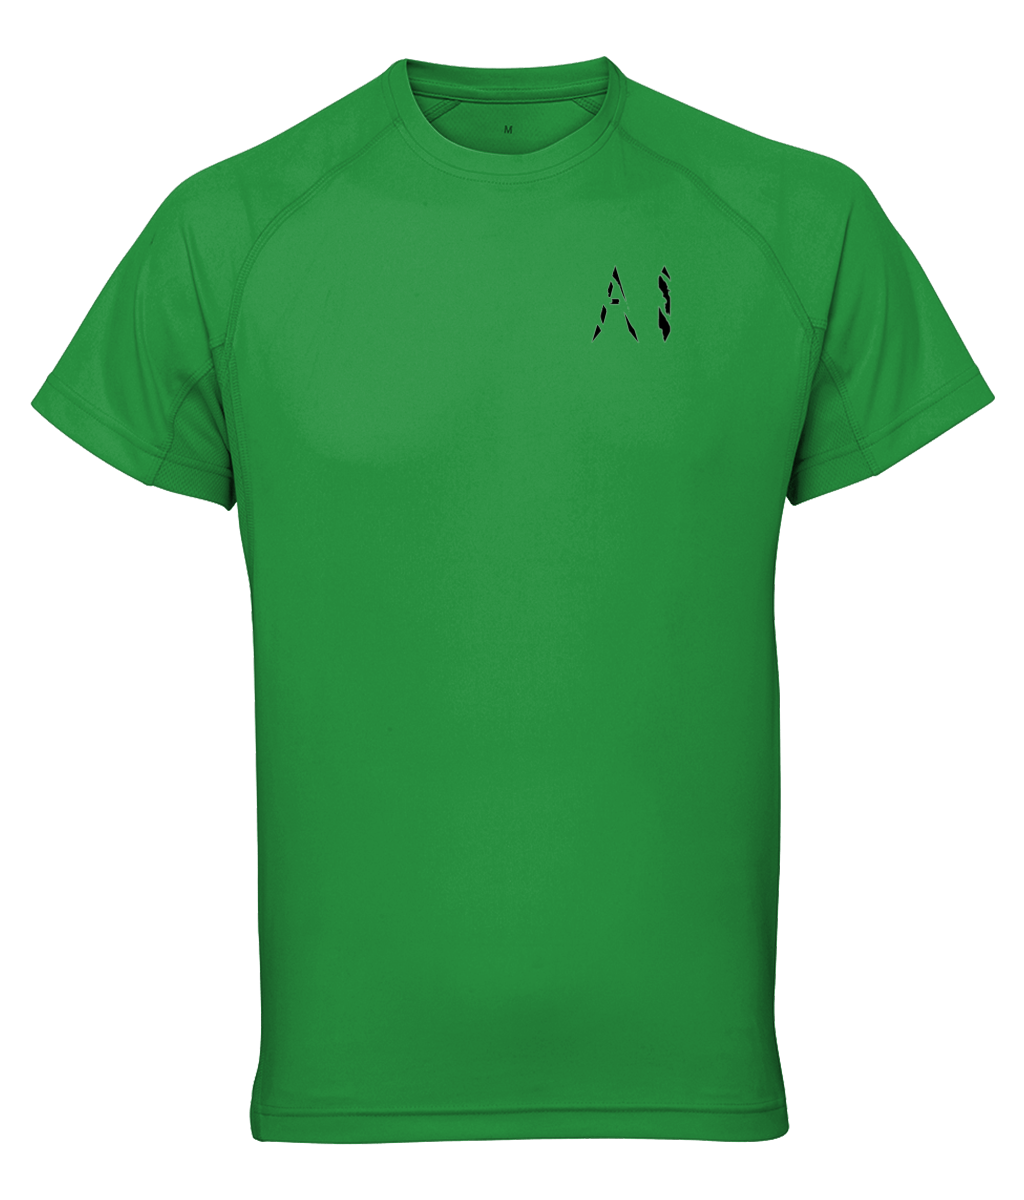 Womens Army green Athletic Performance Top with black AI logo on left breast